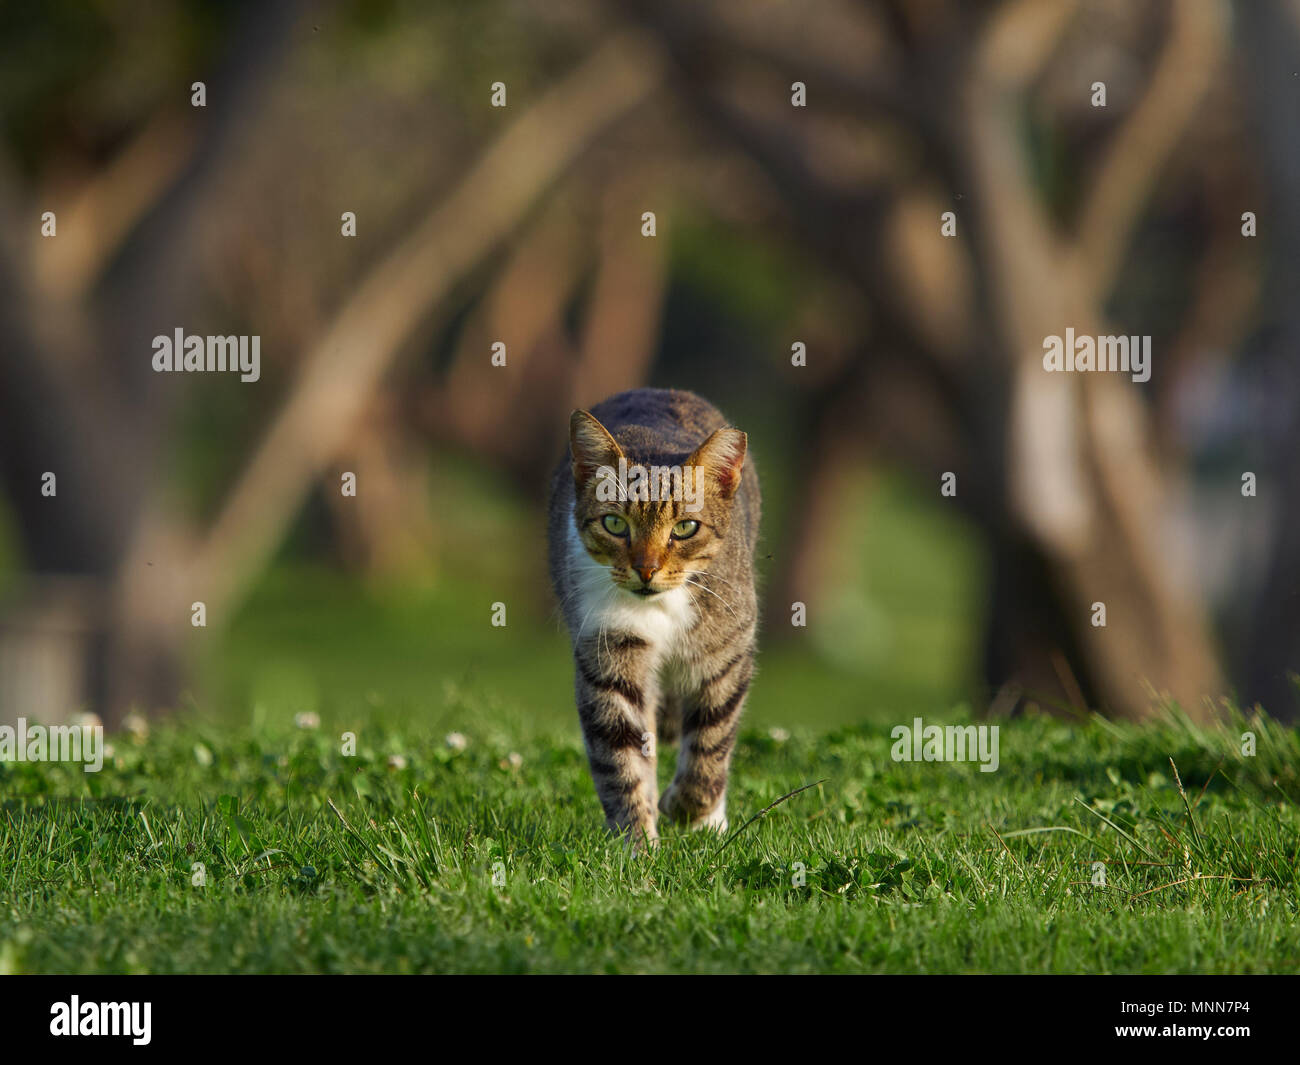 Striped brown cat with bright green eyes walks along a green lawn, in the background tree trunks. Stock Photo